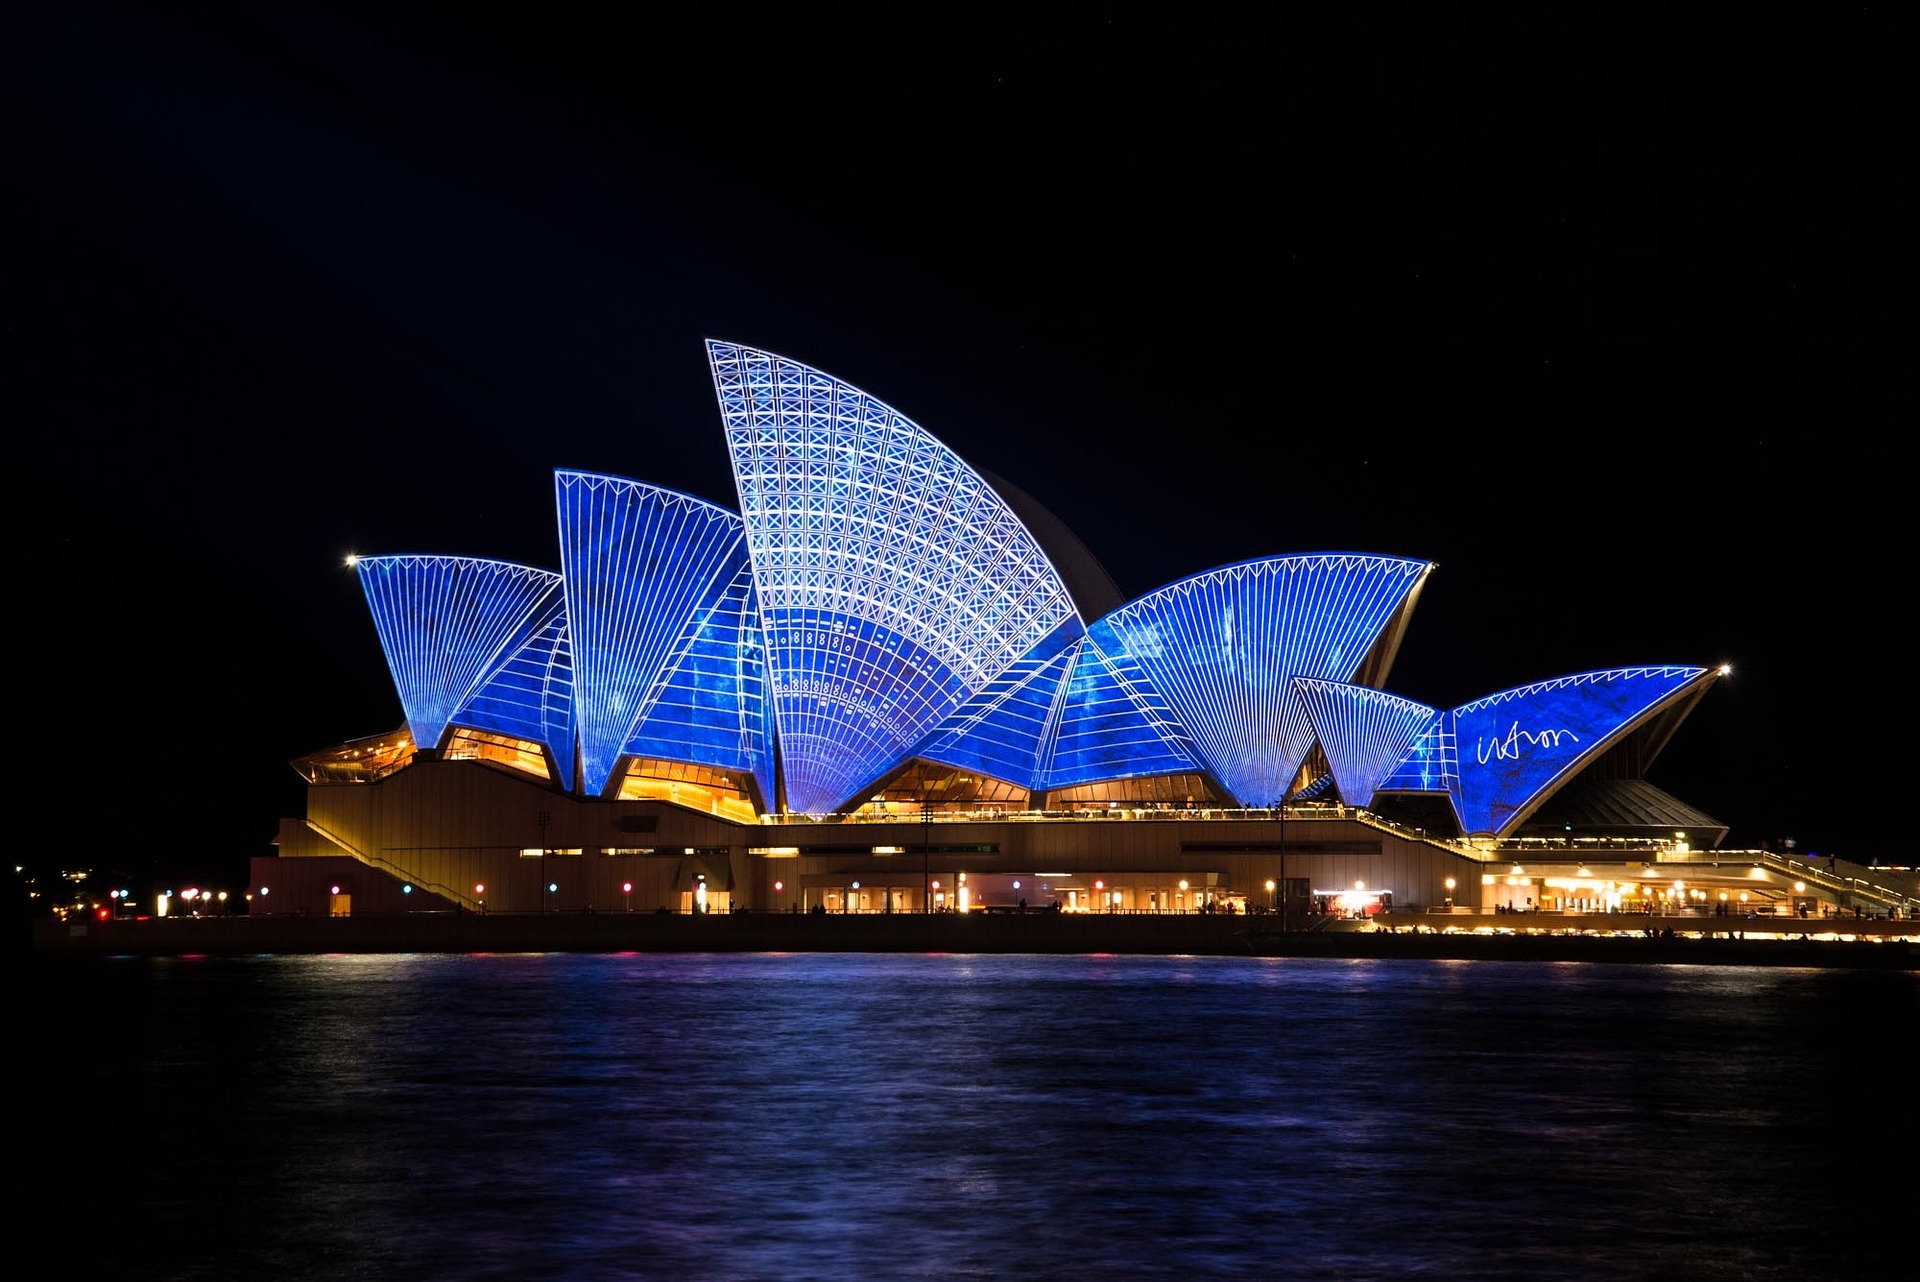 new australian online casinos Like A Pro With The Help Of These 5 Tips